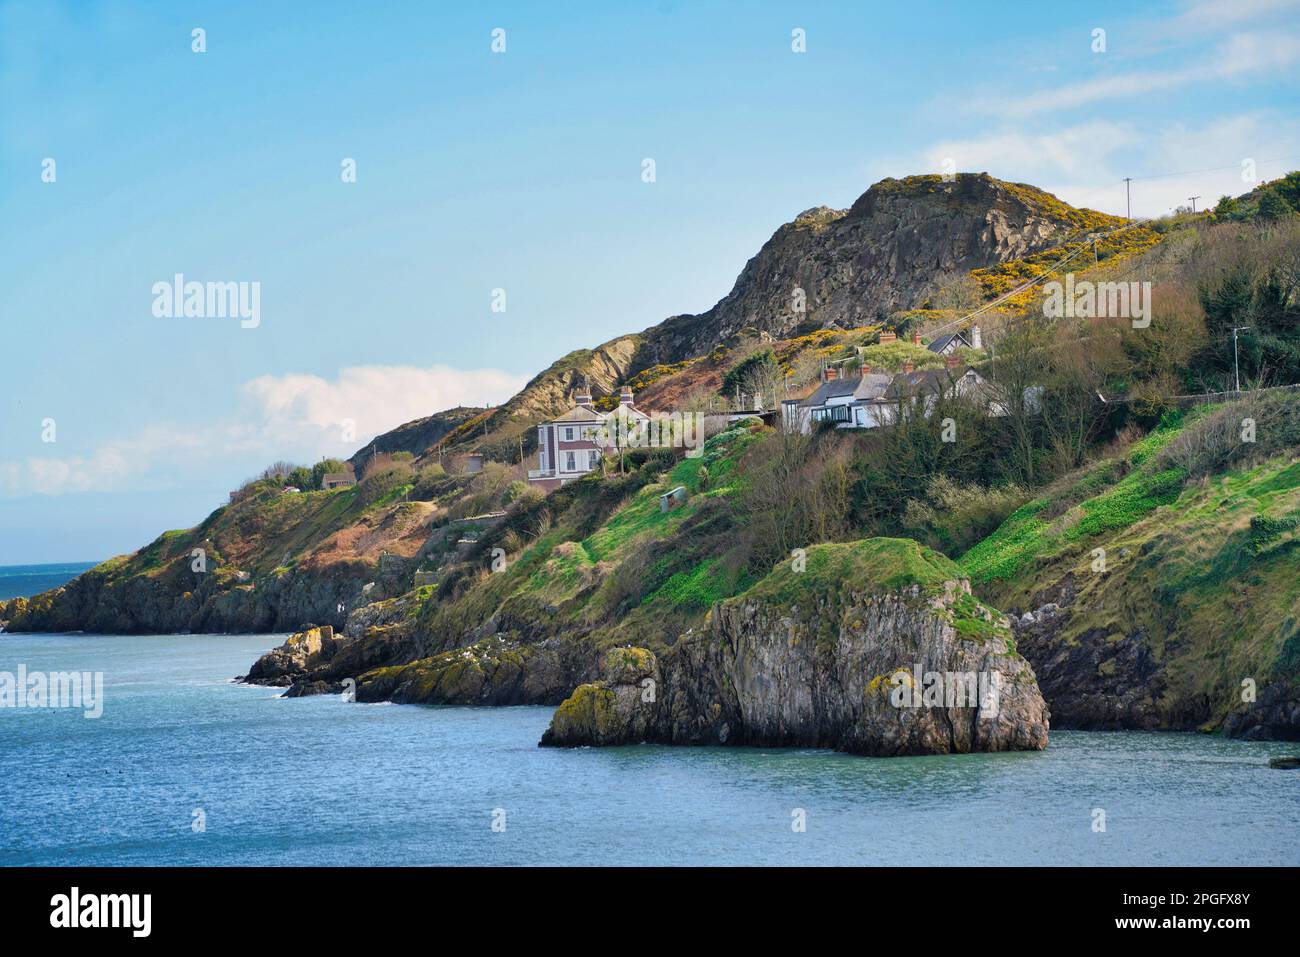 Howth Head cliff in Howth, Ireland, with houses overlooking the ocean Stock Photo